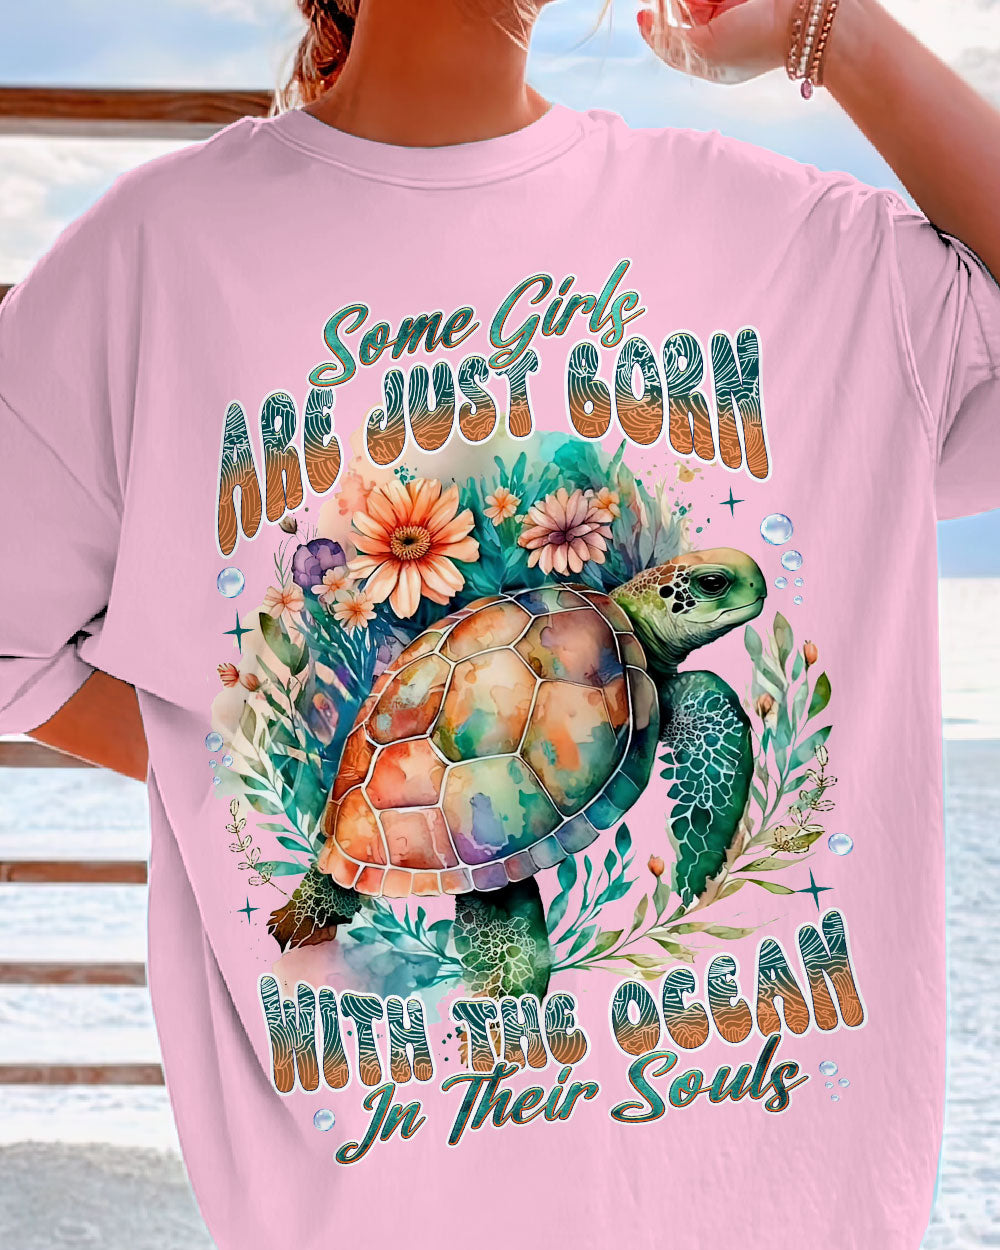 SOME GIRLS ARE JUST BORN TURLTE WATERCOLOR COTTON SHIRT - TLNT1104246